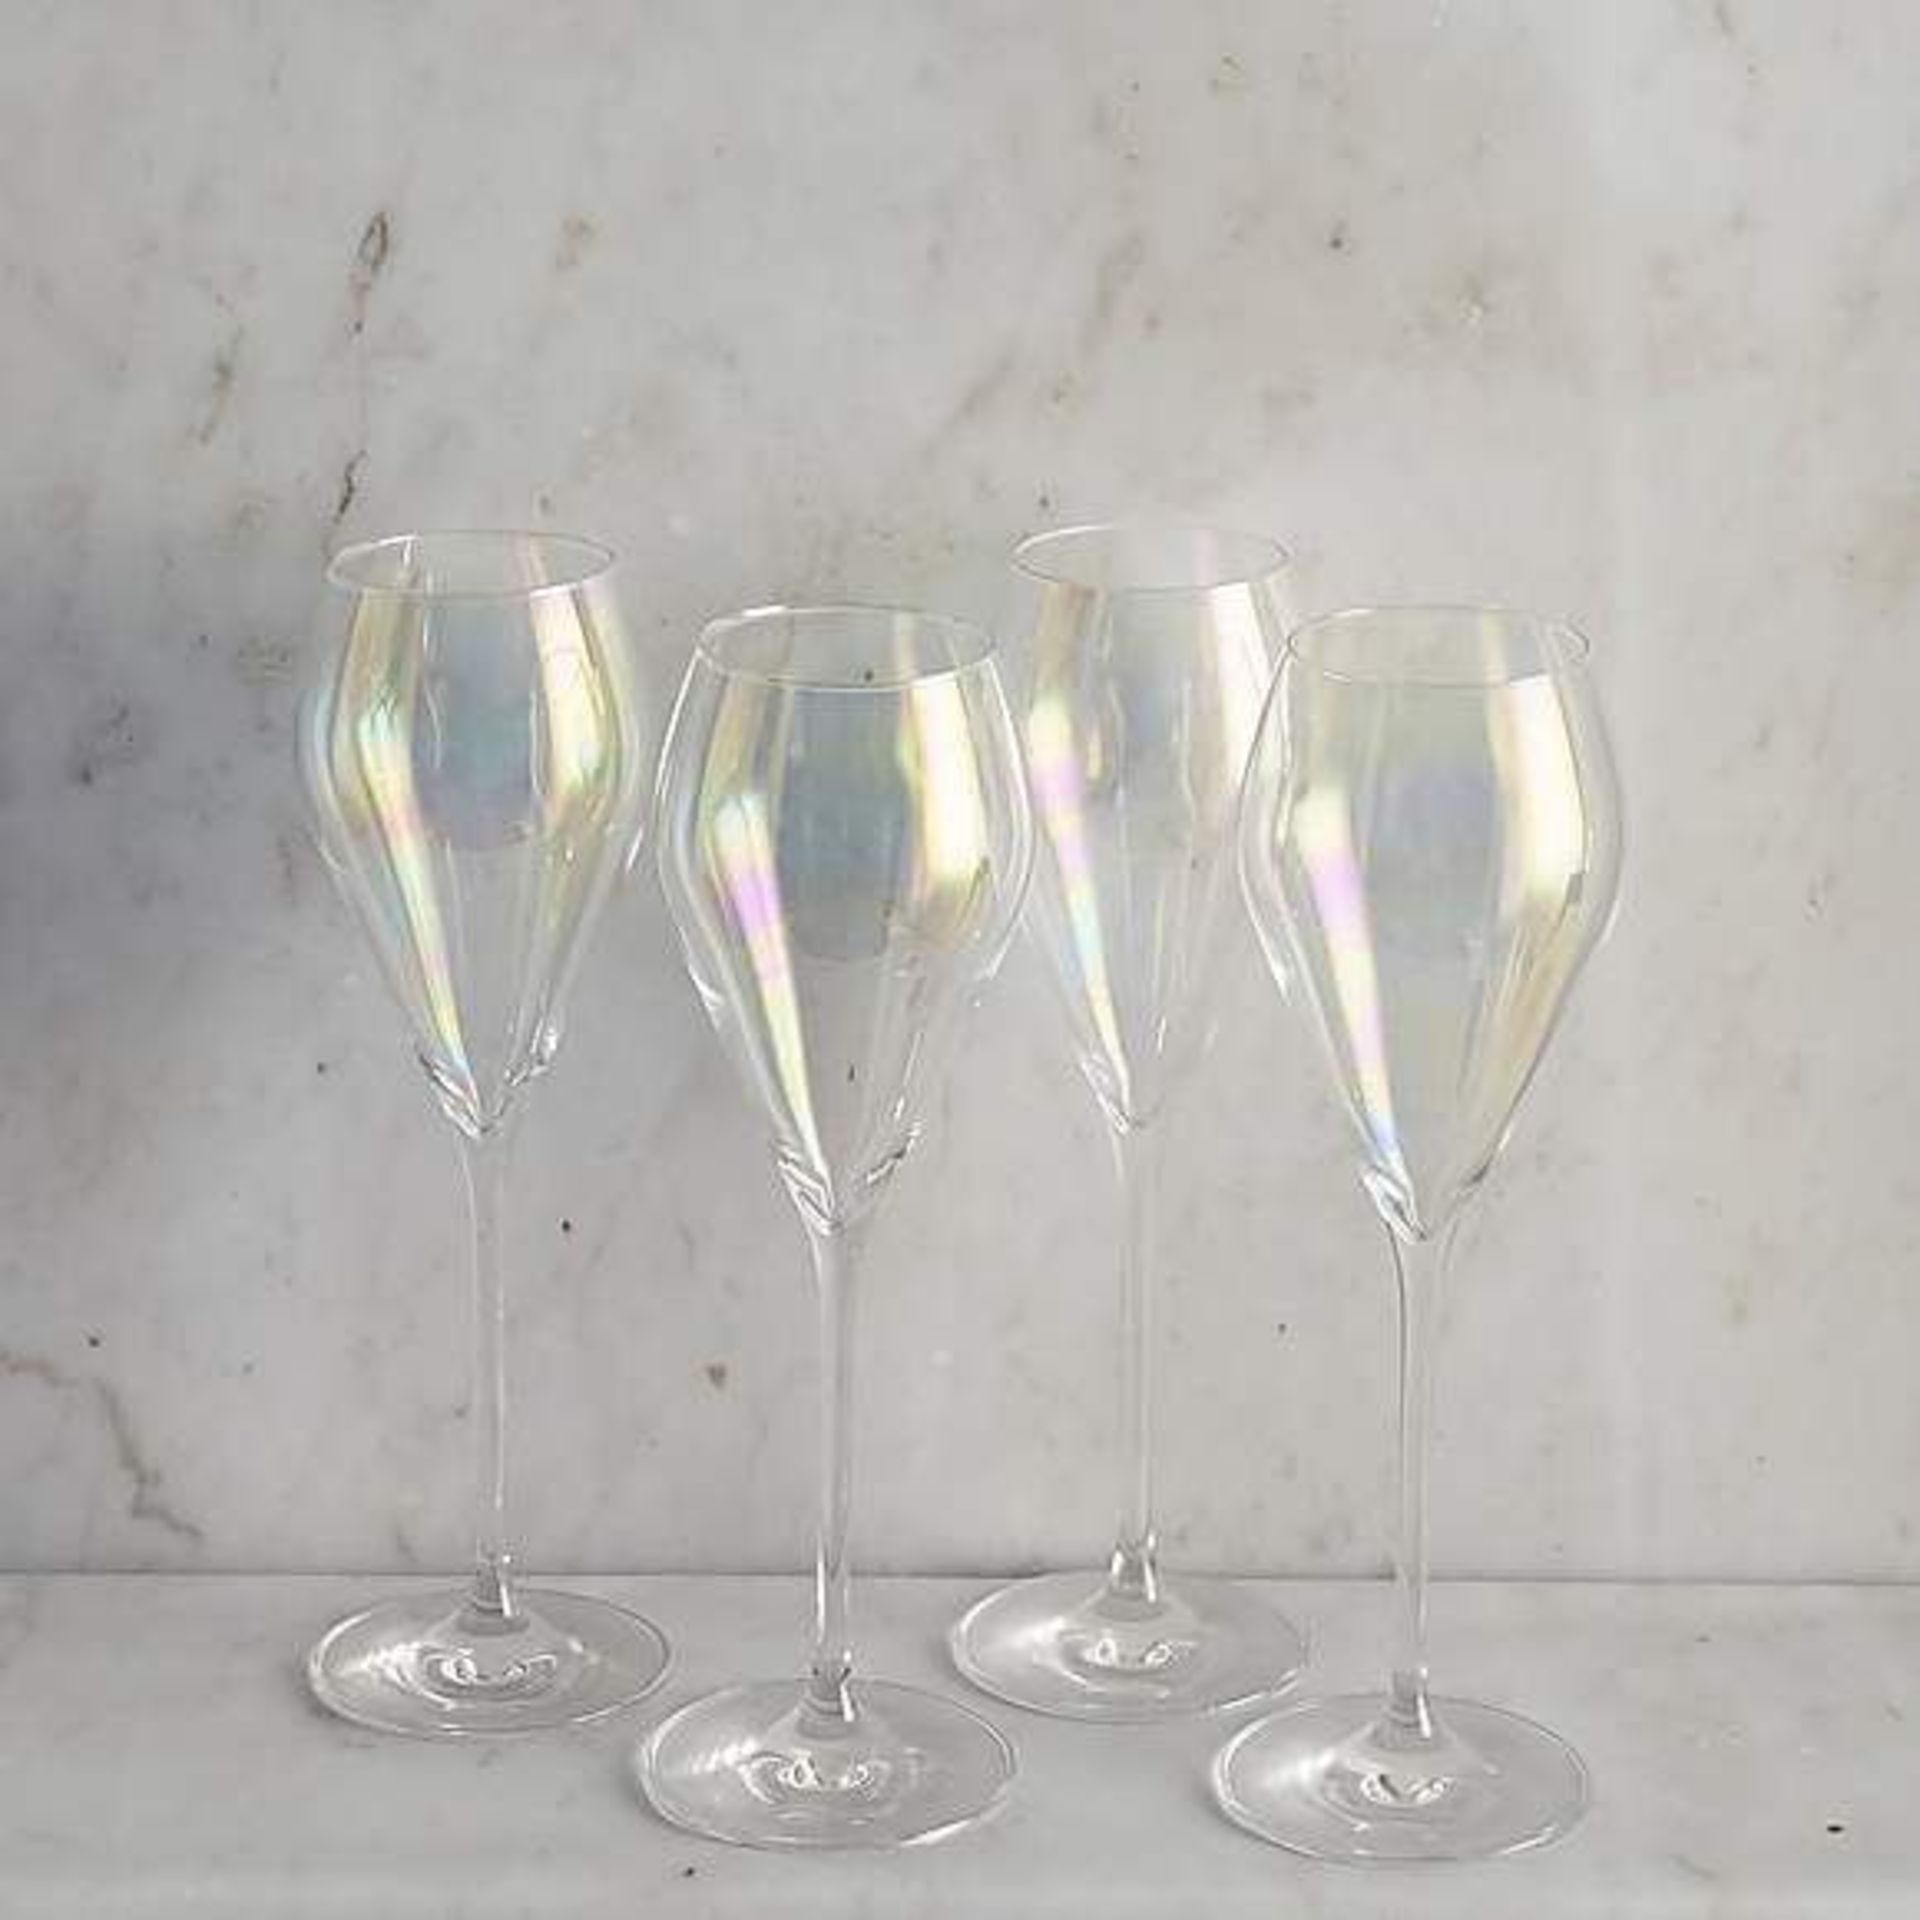 BRAND NEW SET OF 4 LUSTRE PROSECCO FLUTE GLASSES - RRP £20. - Image 2 of 2